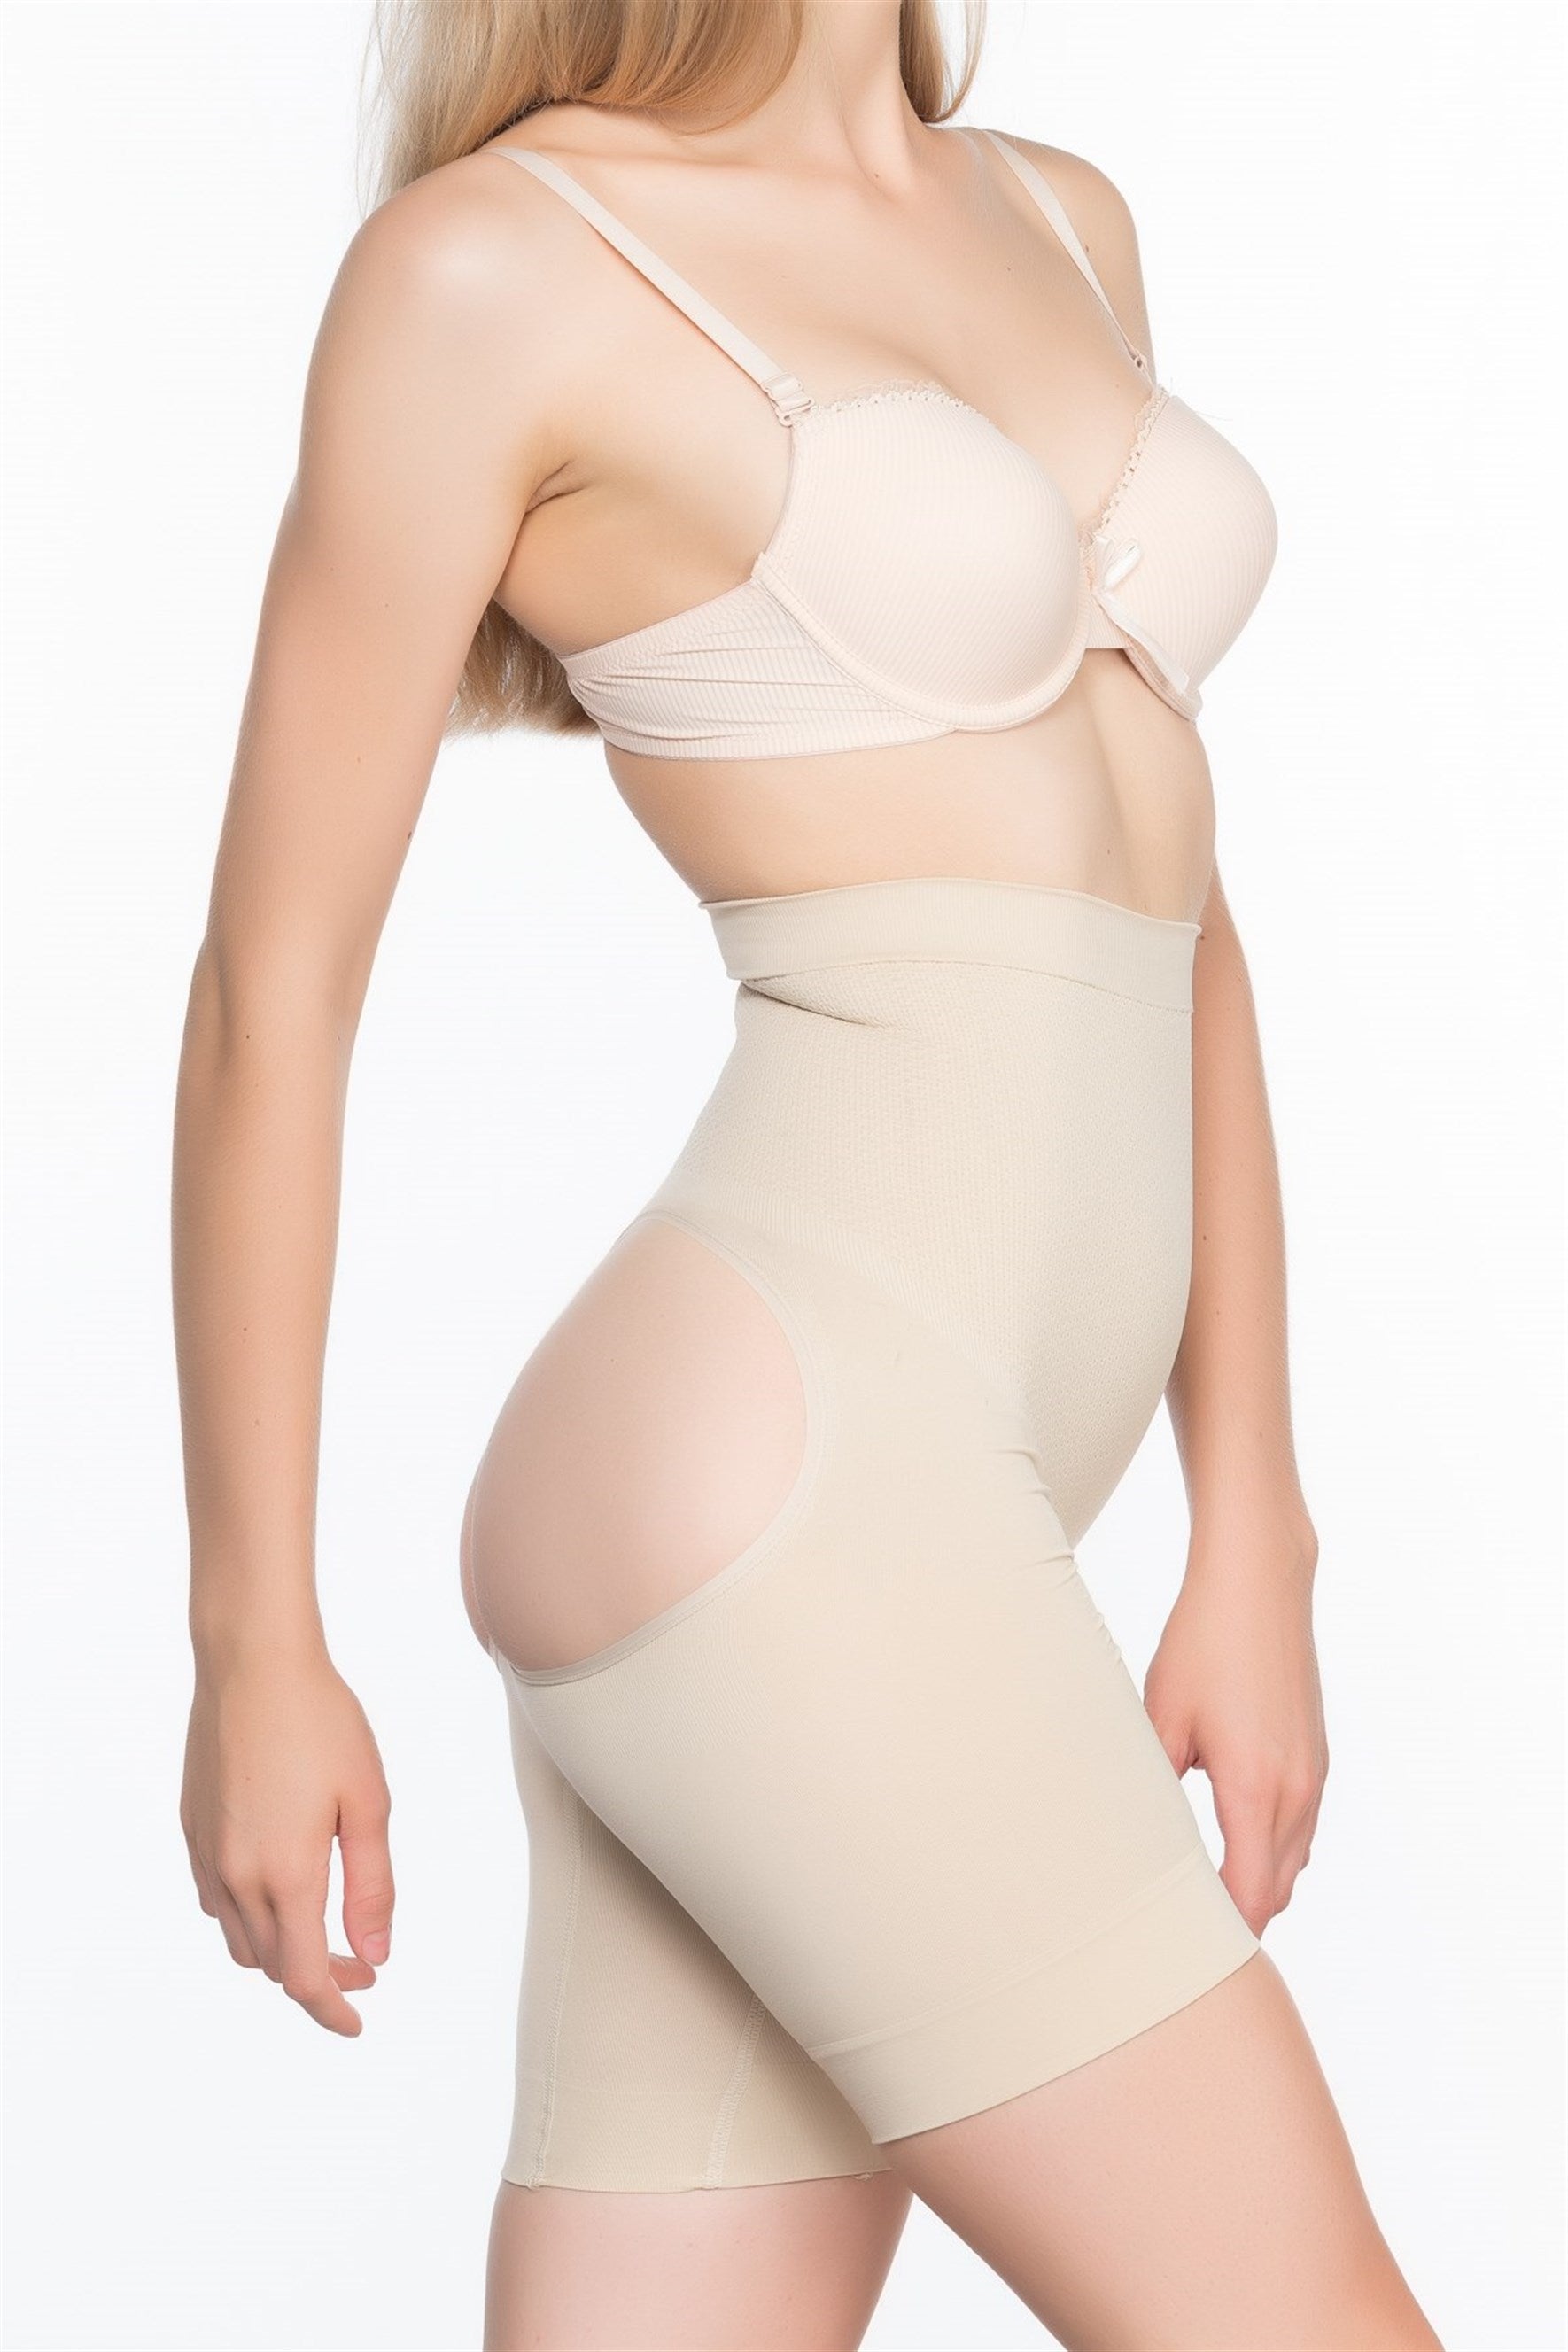 Shopymommy 2032 Seamless Postpartum Corset With Massage Feature